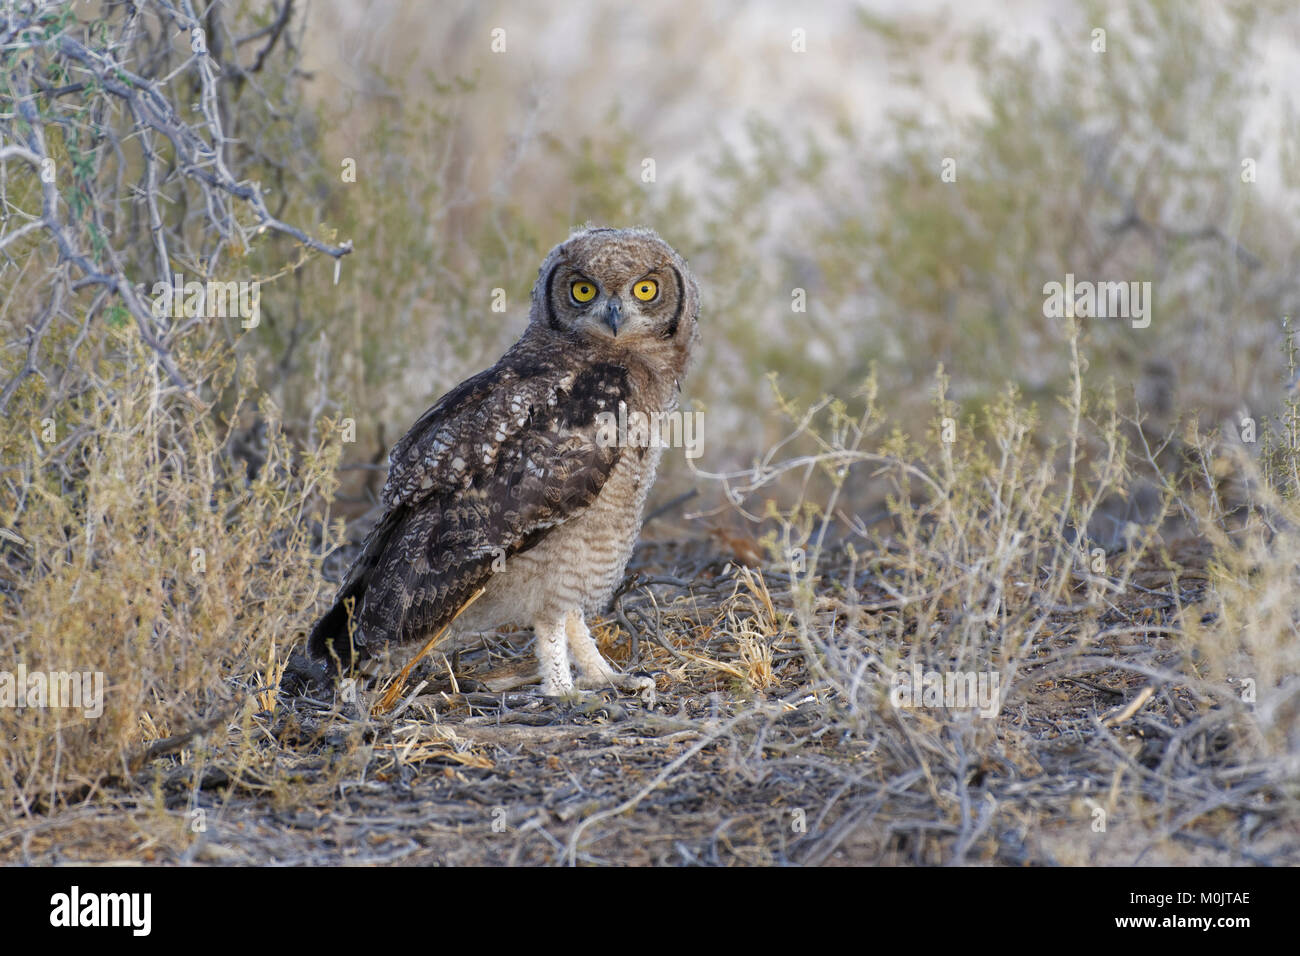 Spotted eagle-owl (Bubo africanus), young bird on the ground looking for prey, Kgalagadi Transfrontier Park, Northern Cape Stock Photo